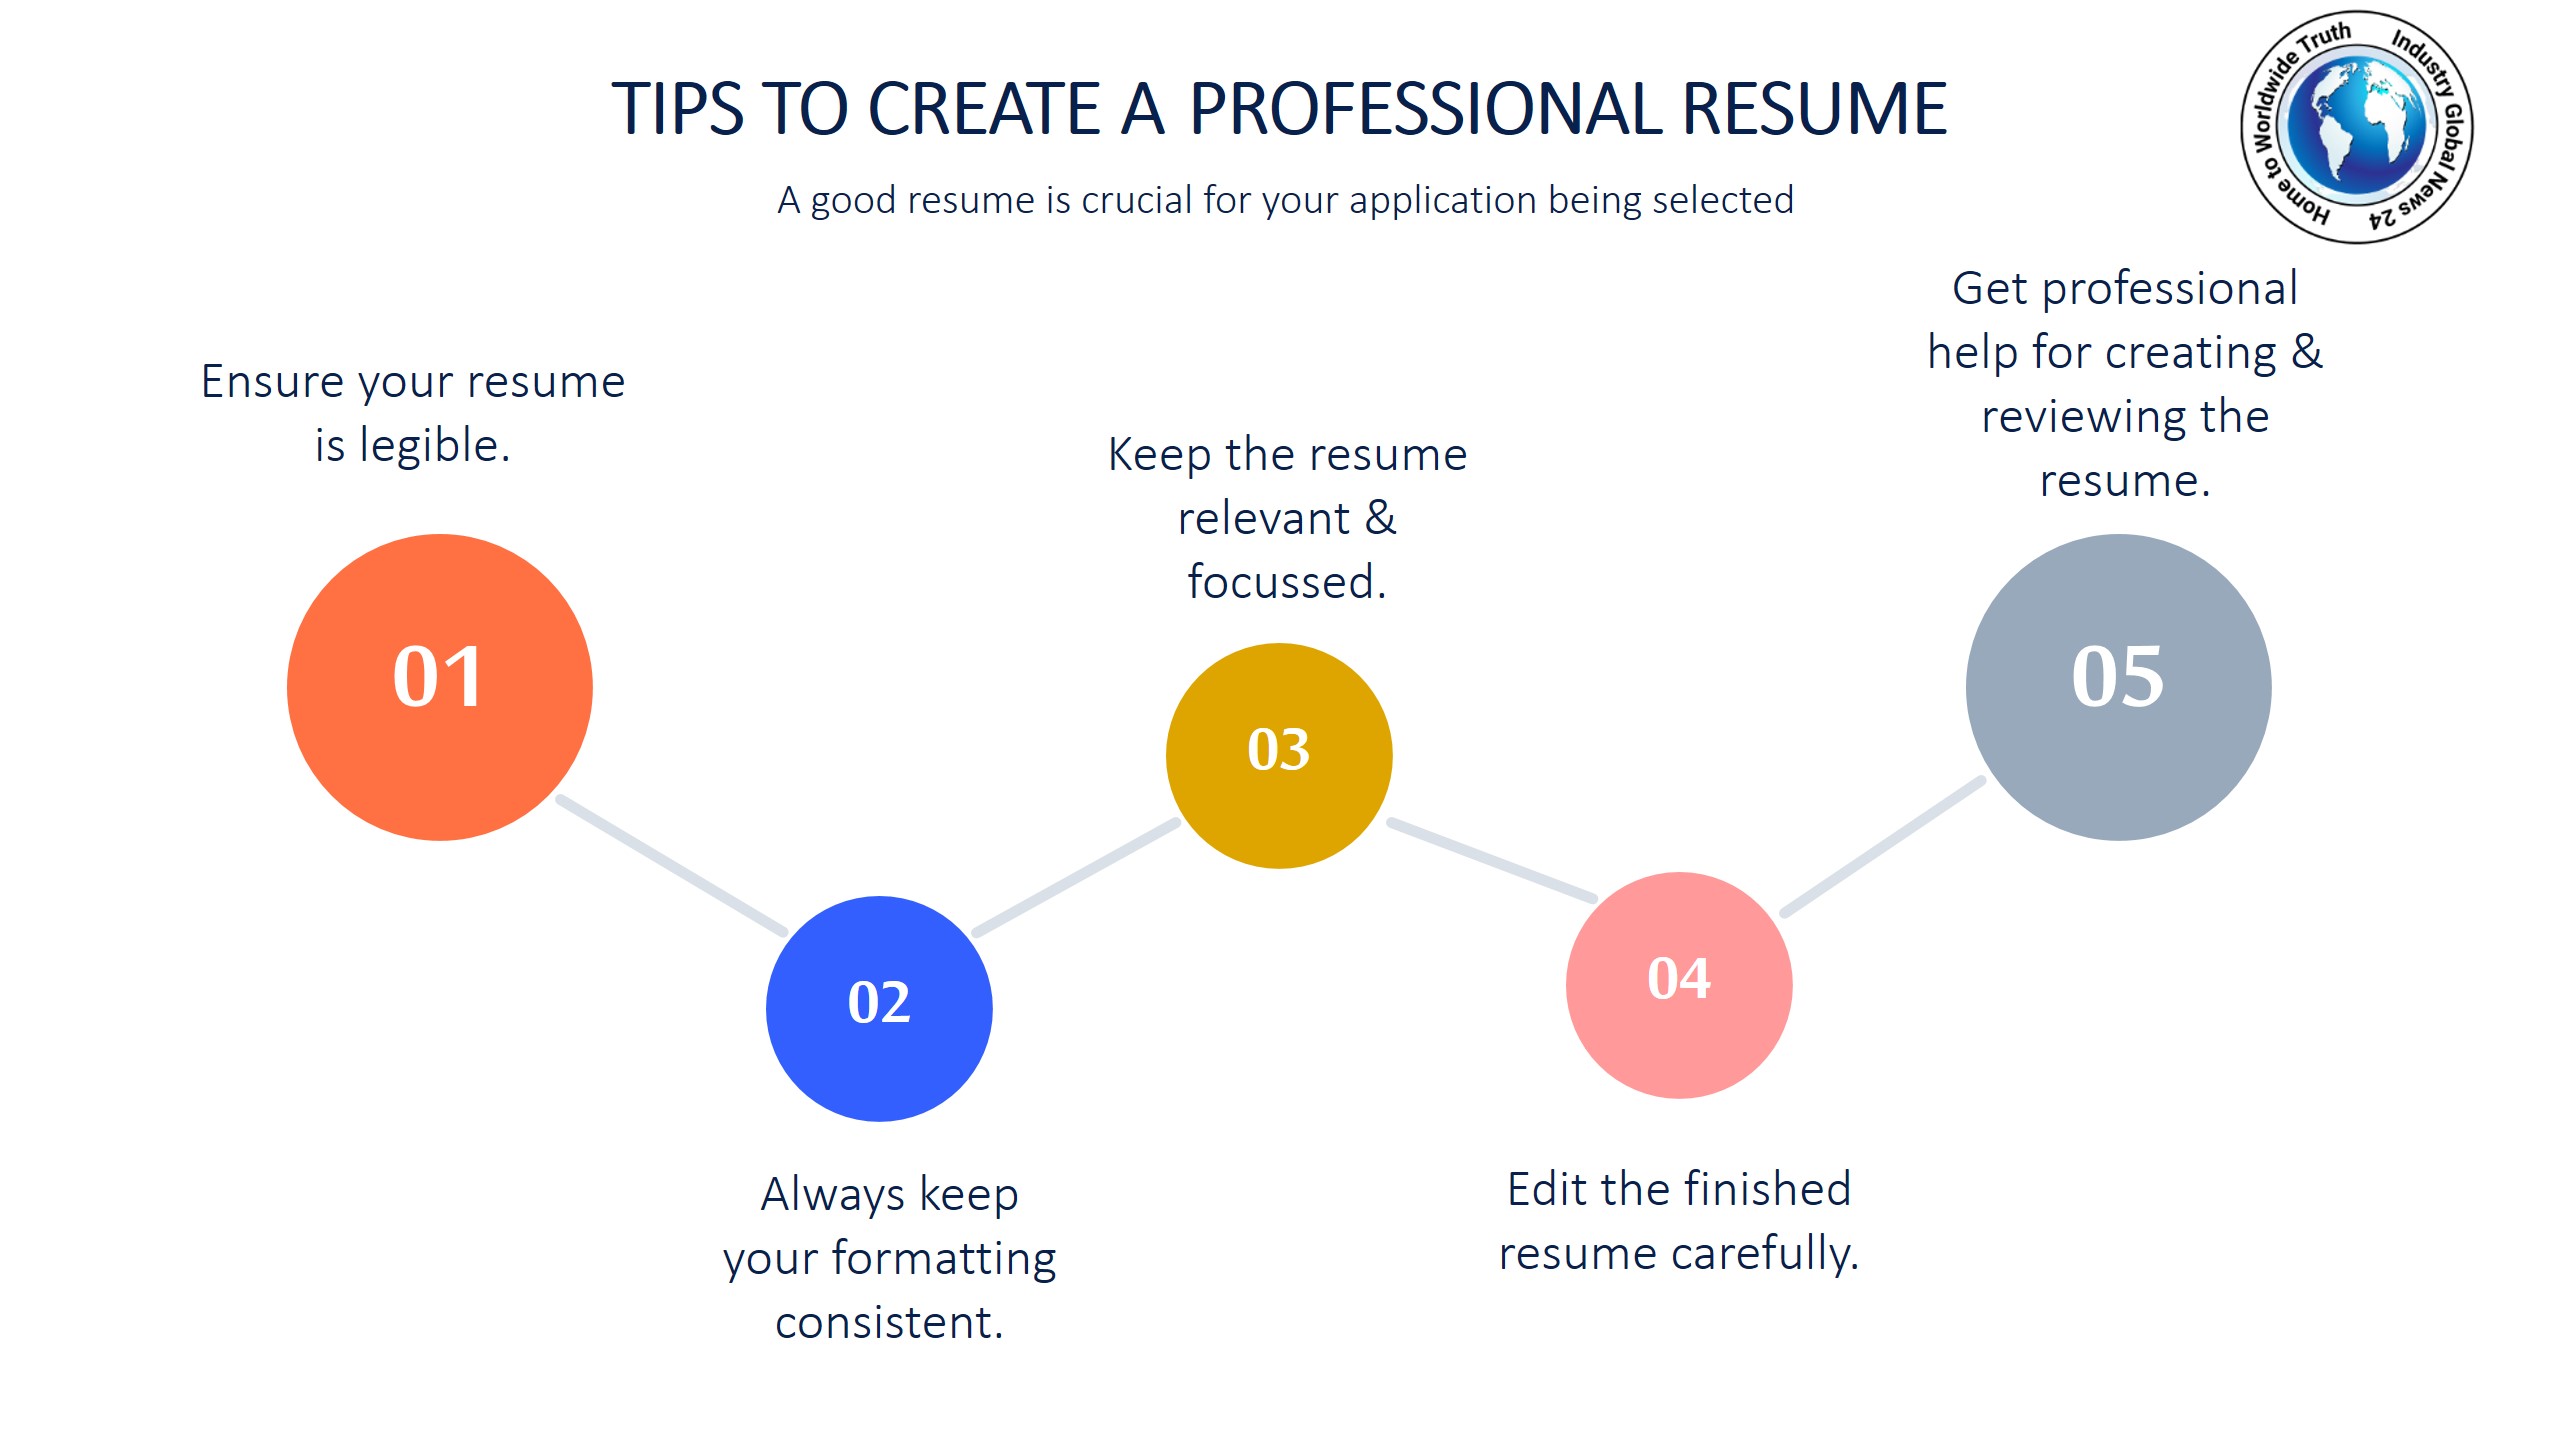 Tips to create a professional resume